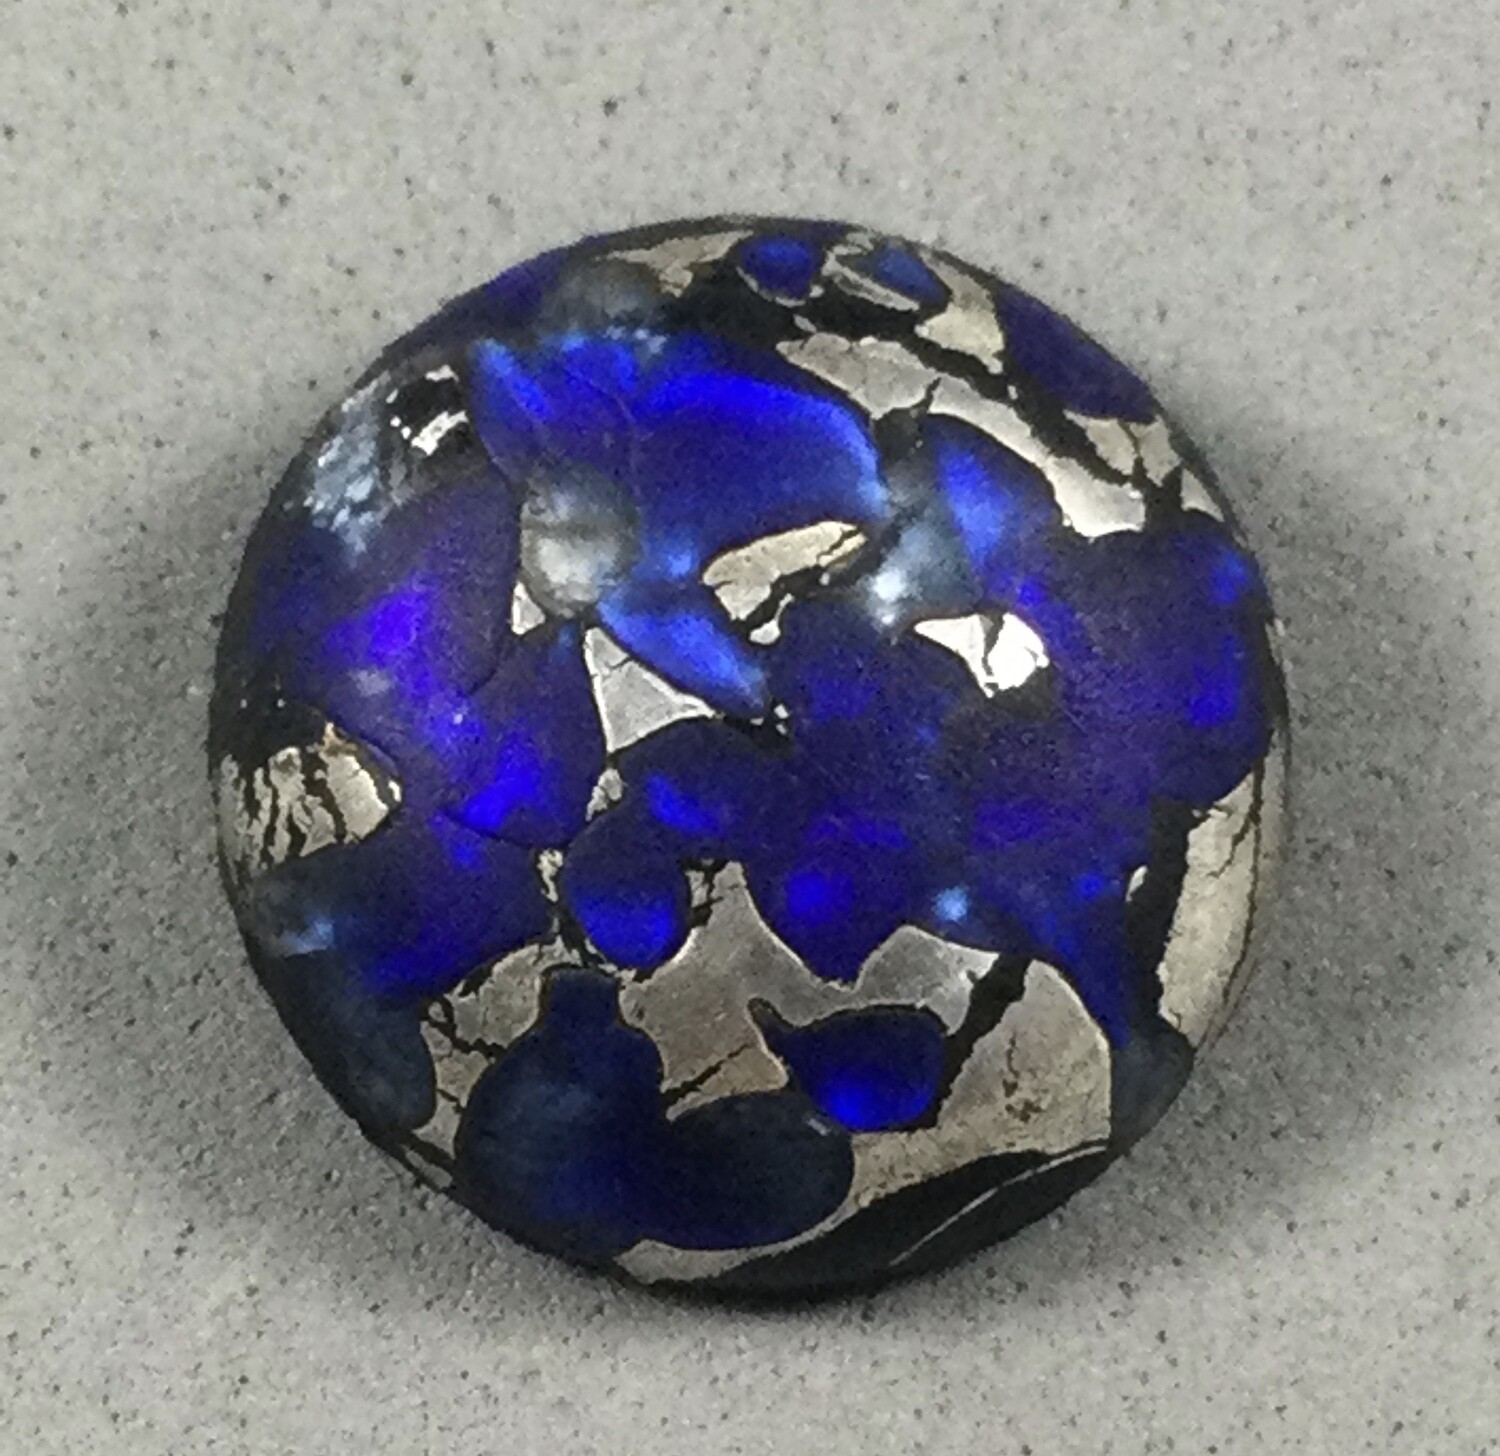 Medium Popper with Silver and Cobalt Glass